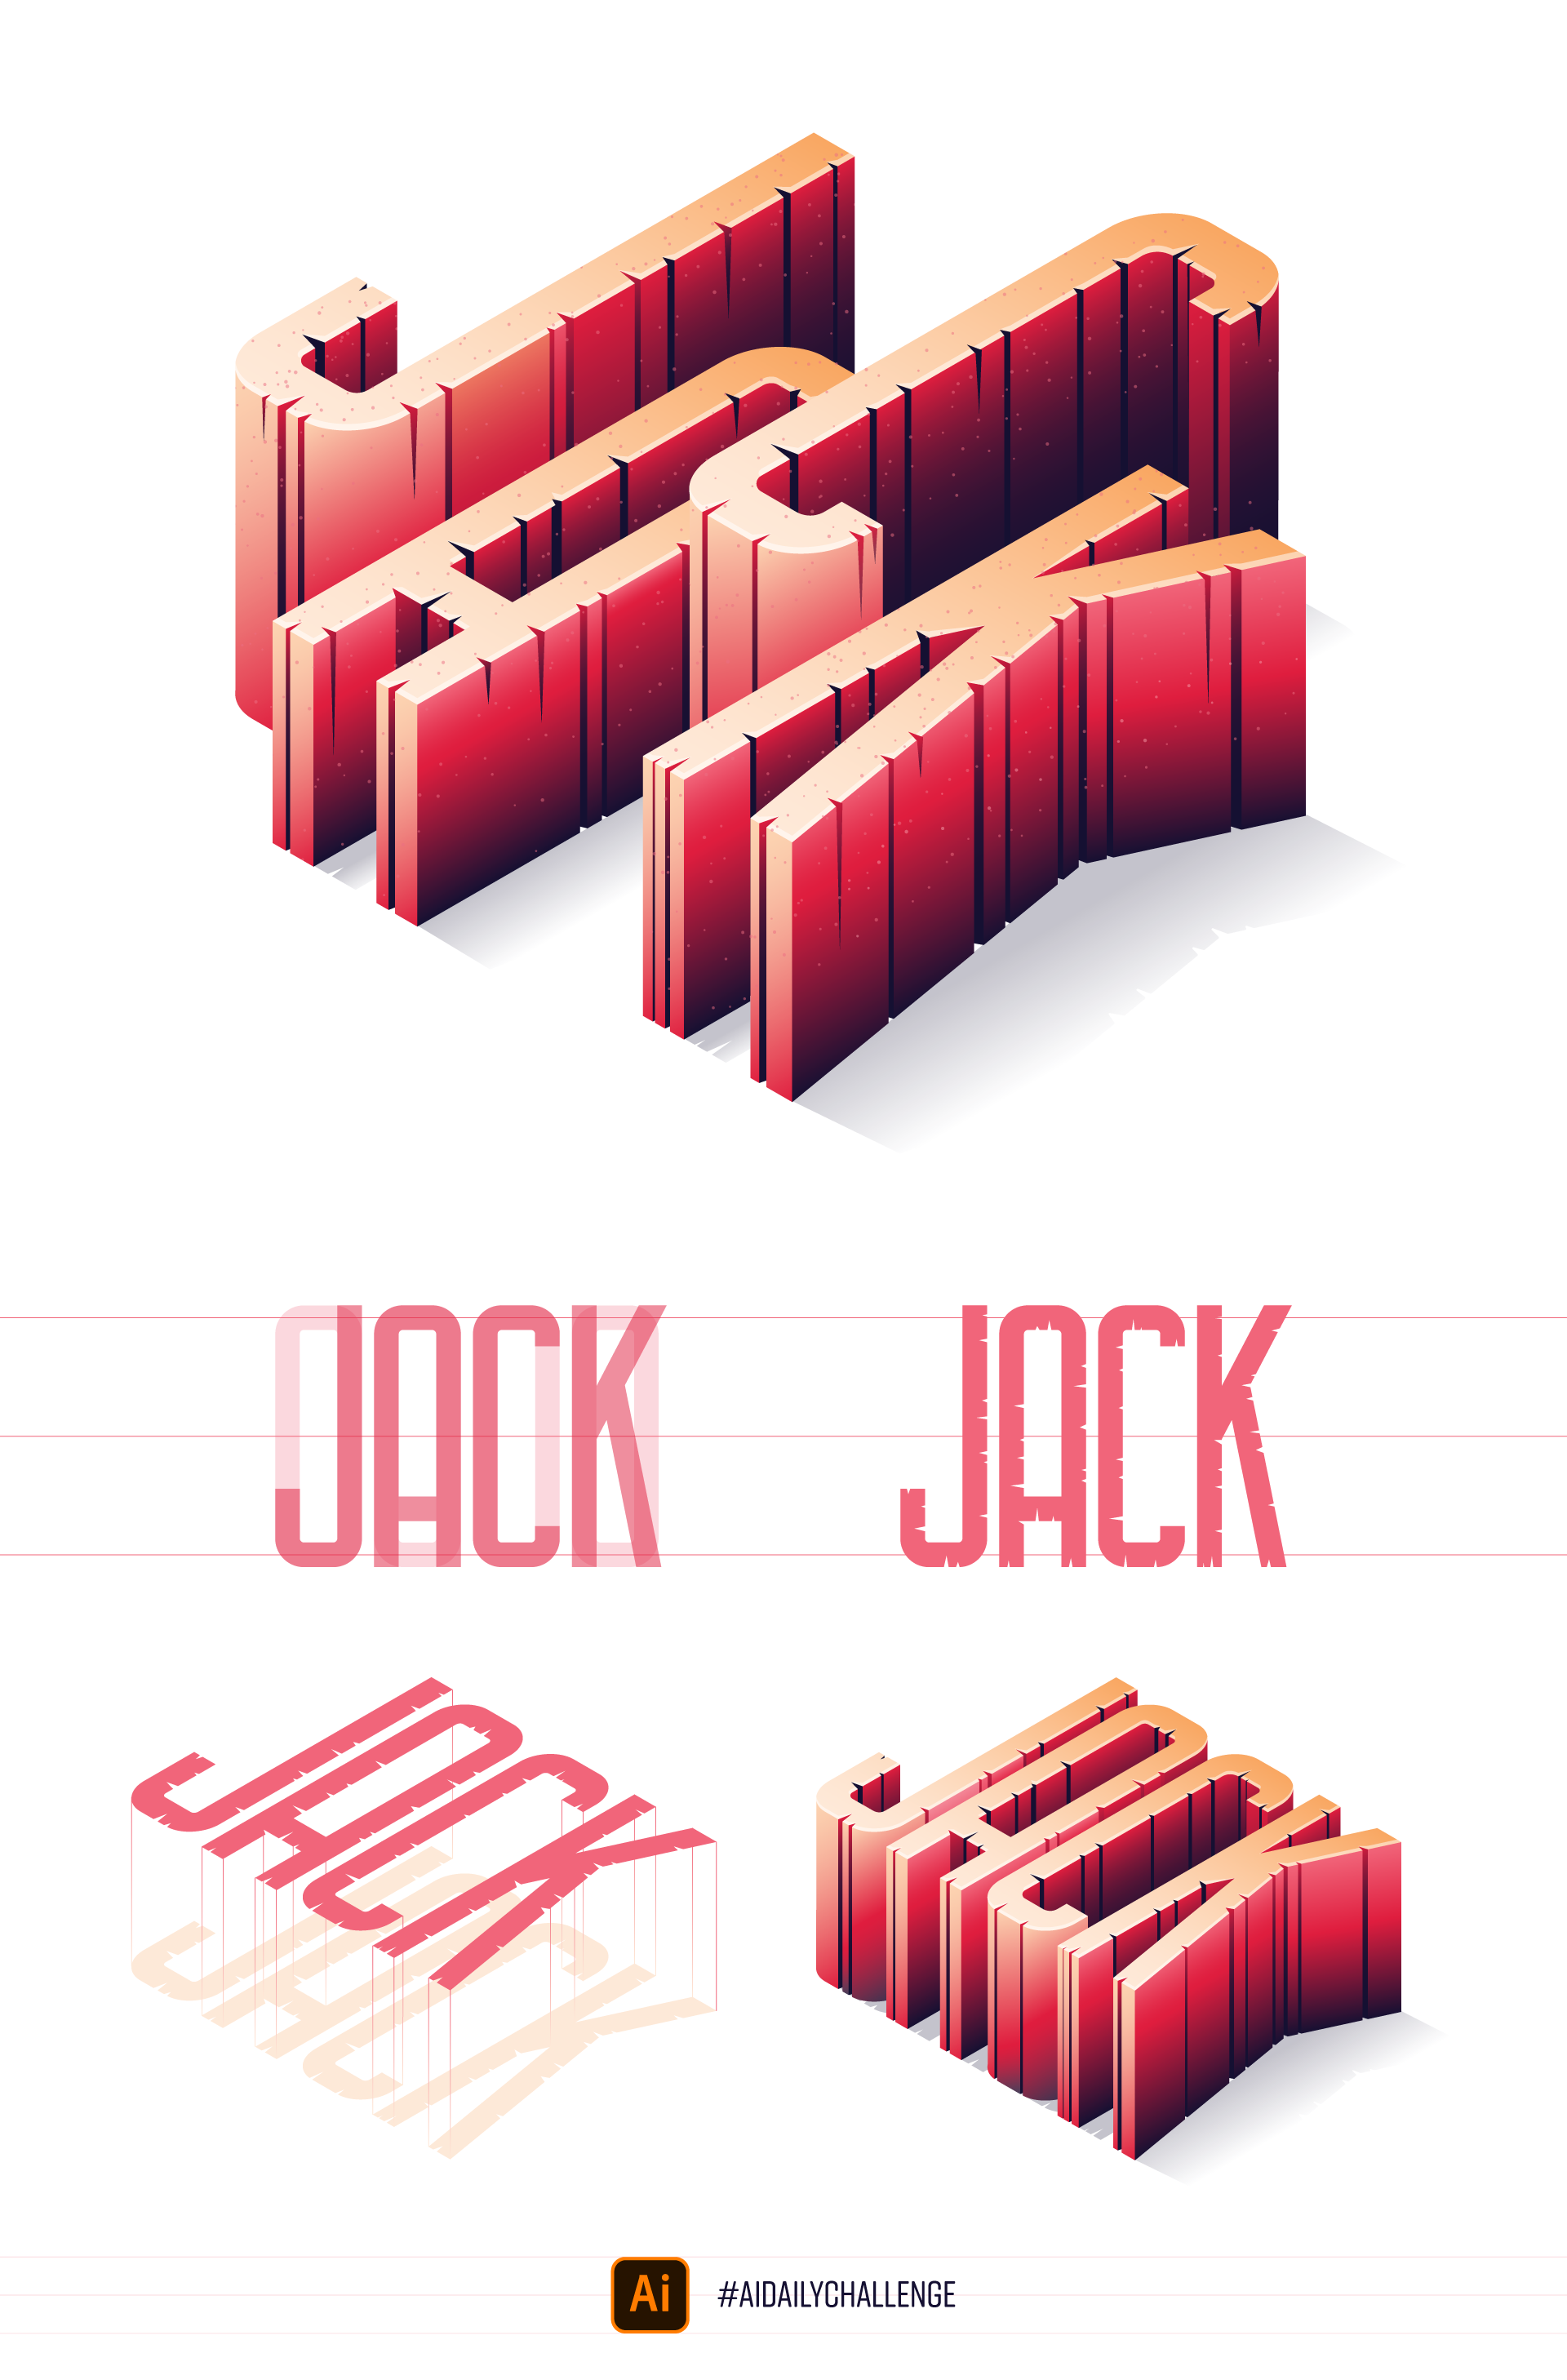 Illustration of "JACK" as textured 3D letters that extend up from a white surface from a semi-isometric view.